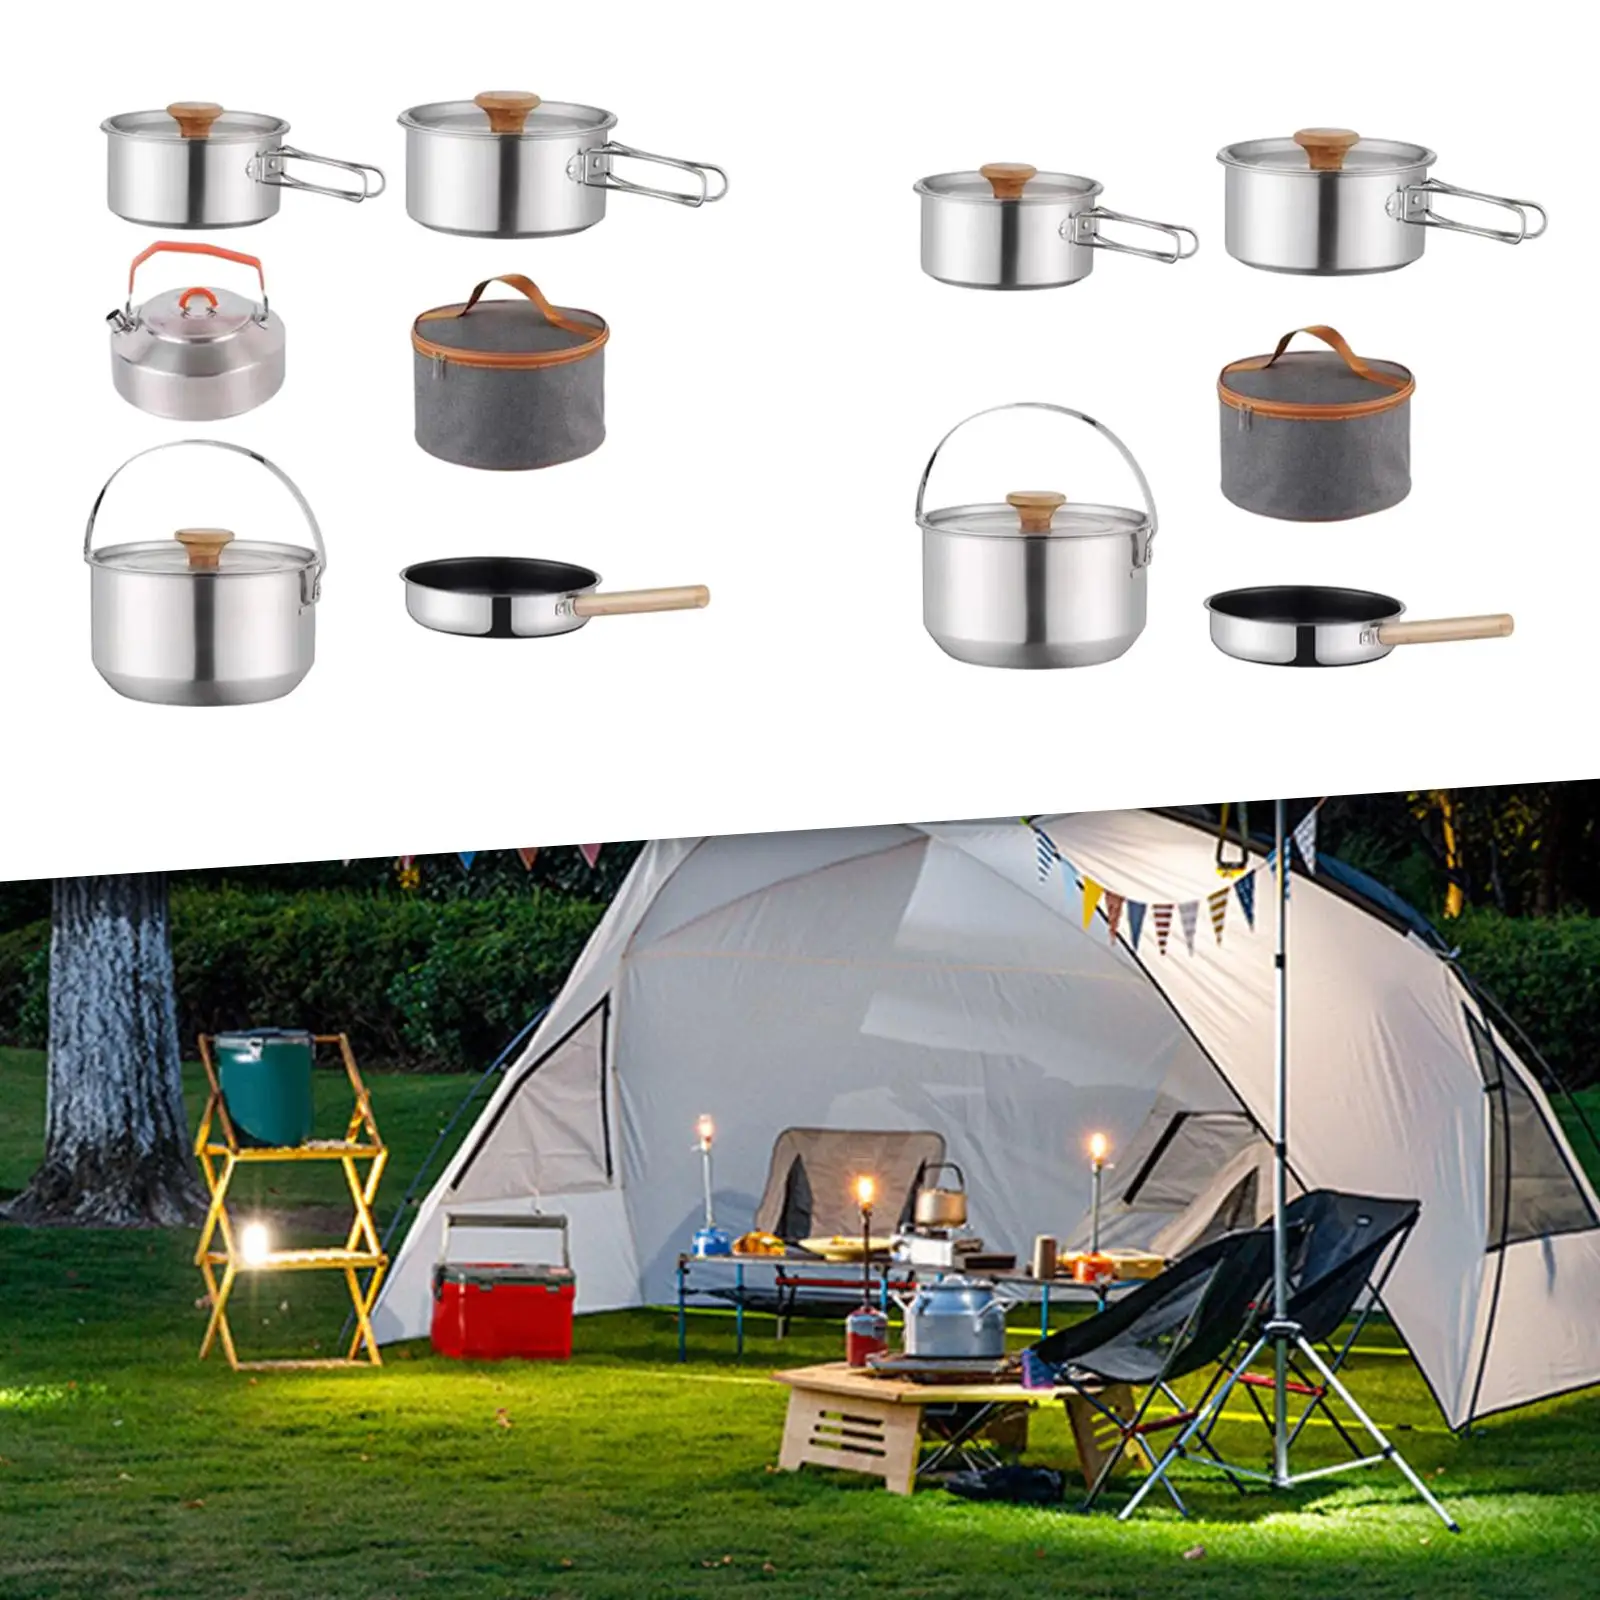 Camping Cookware Kit Cooking Set Nonstick with Storage Bag Utensils Outdoor Pot Cookset for Fishing Picnic Survival Dinner